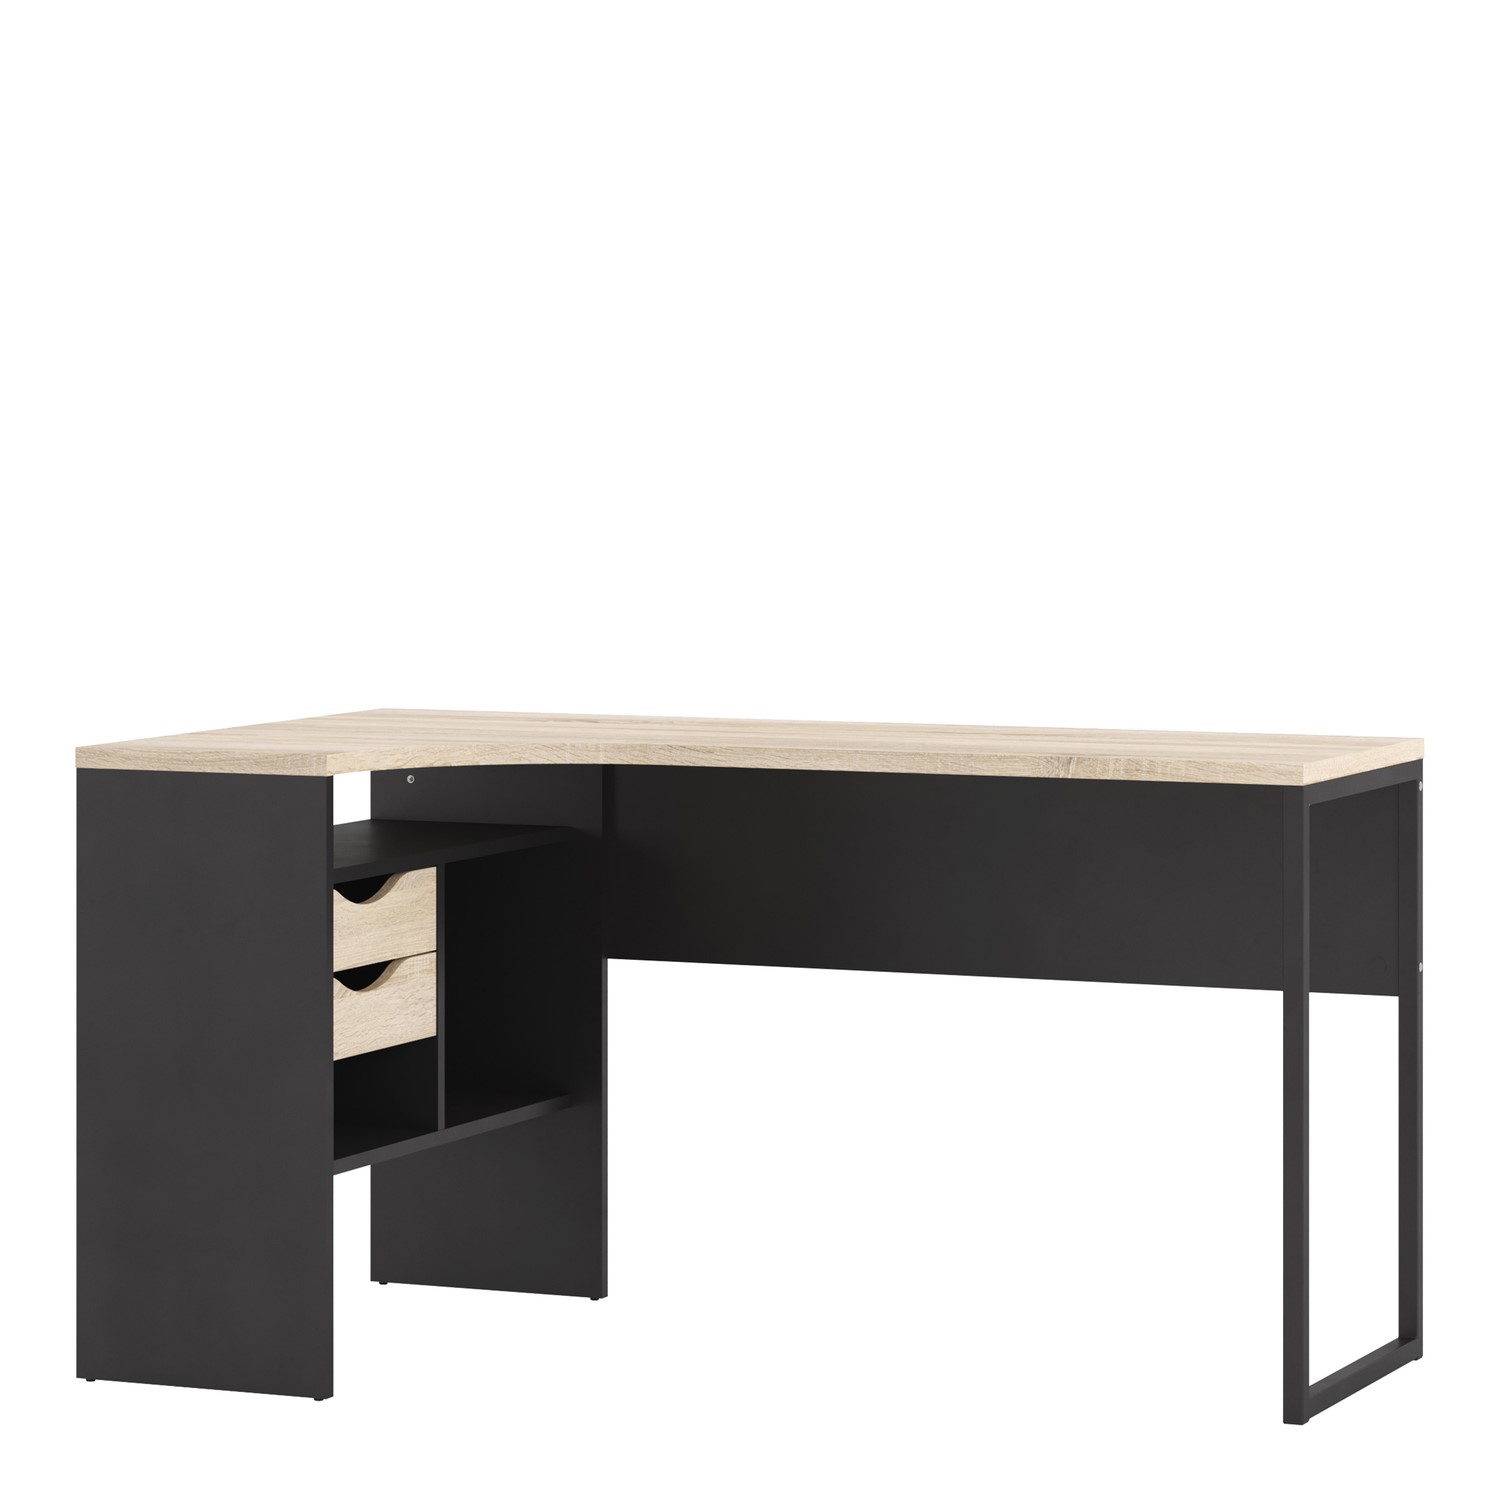 Read more about Black and oak effect l shaped desk with 2 drawers function plus